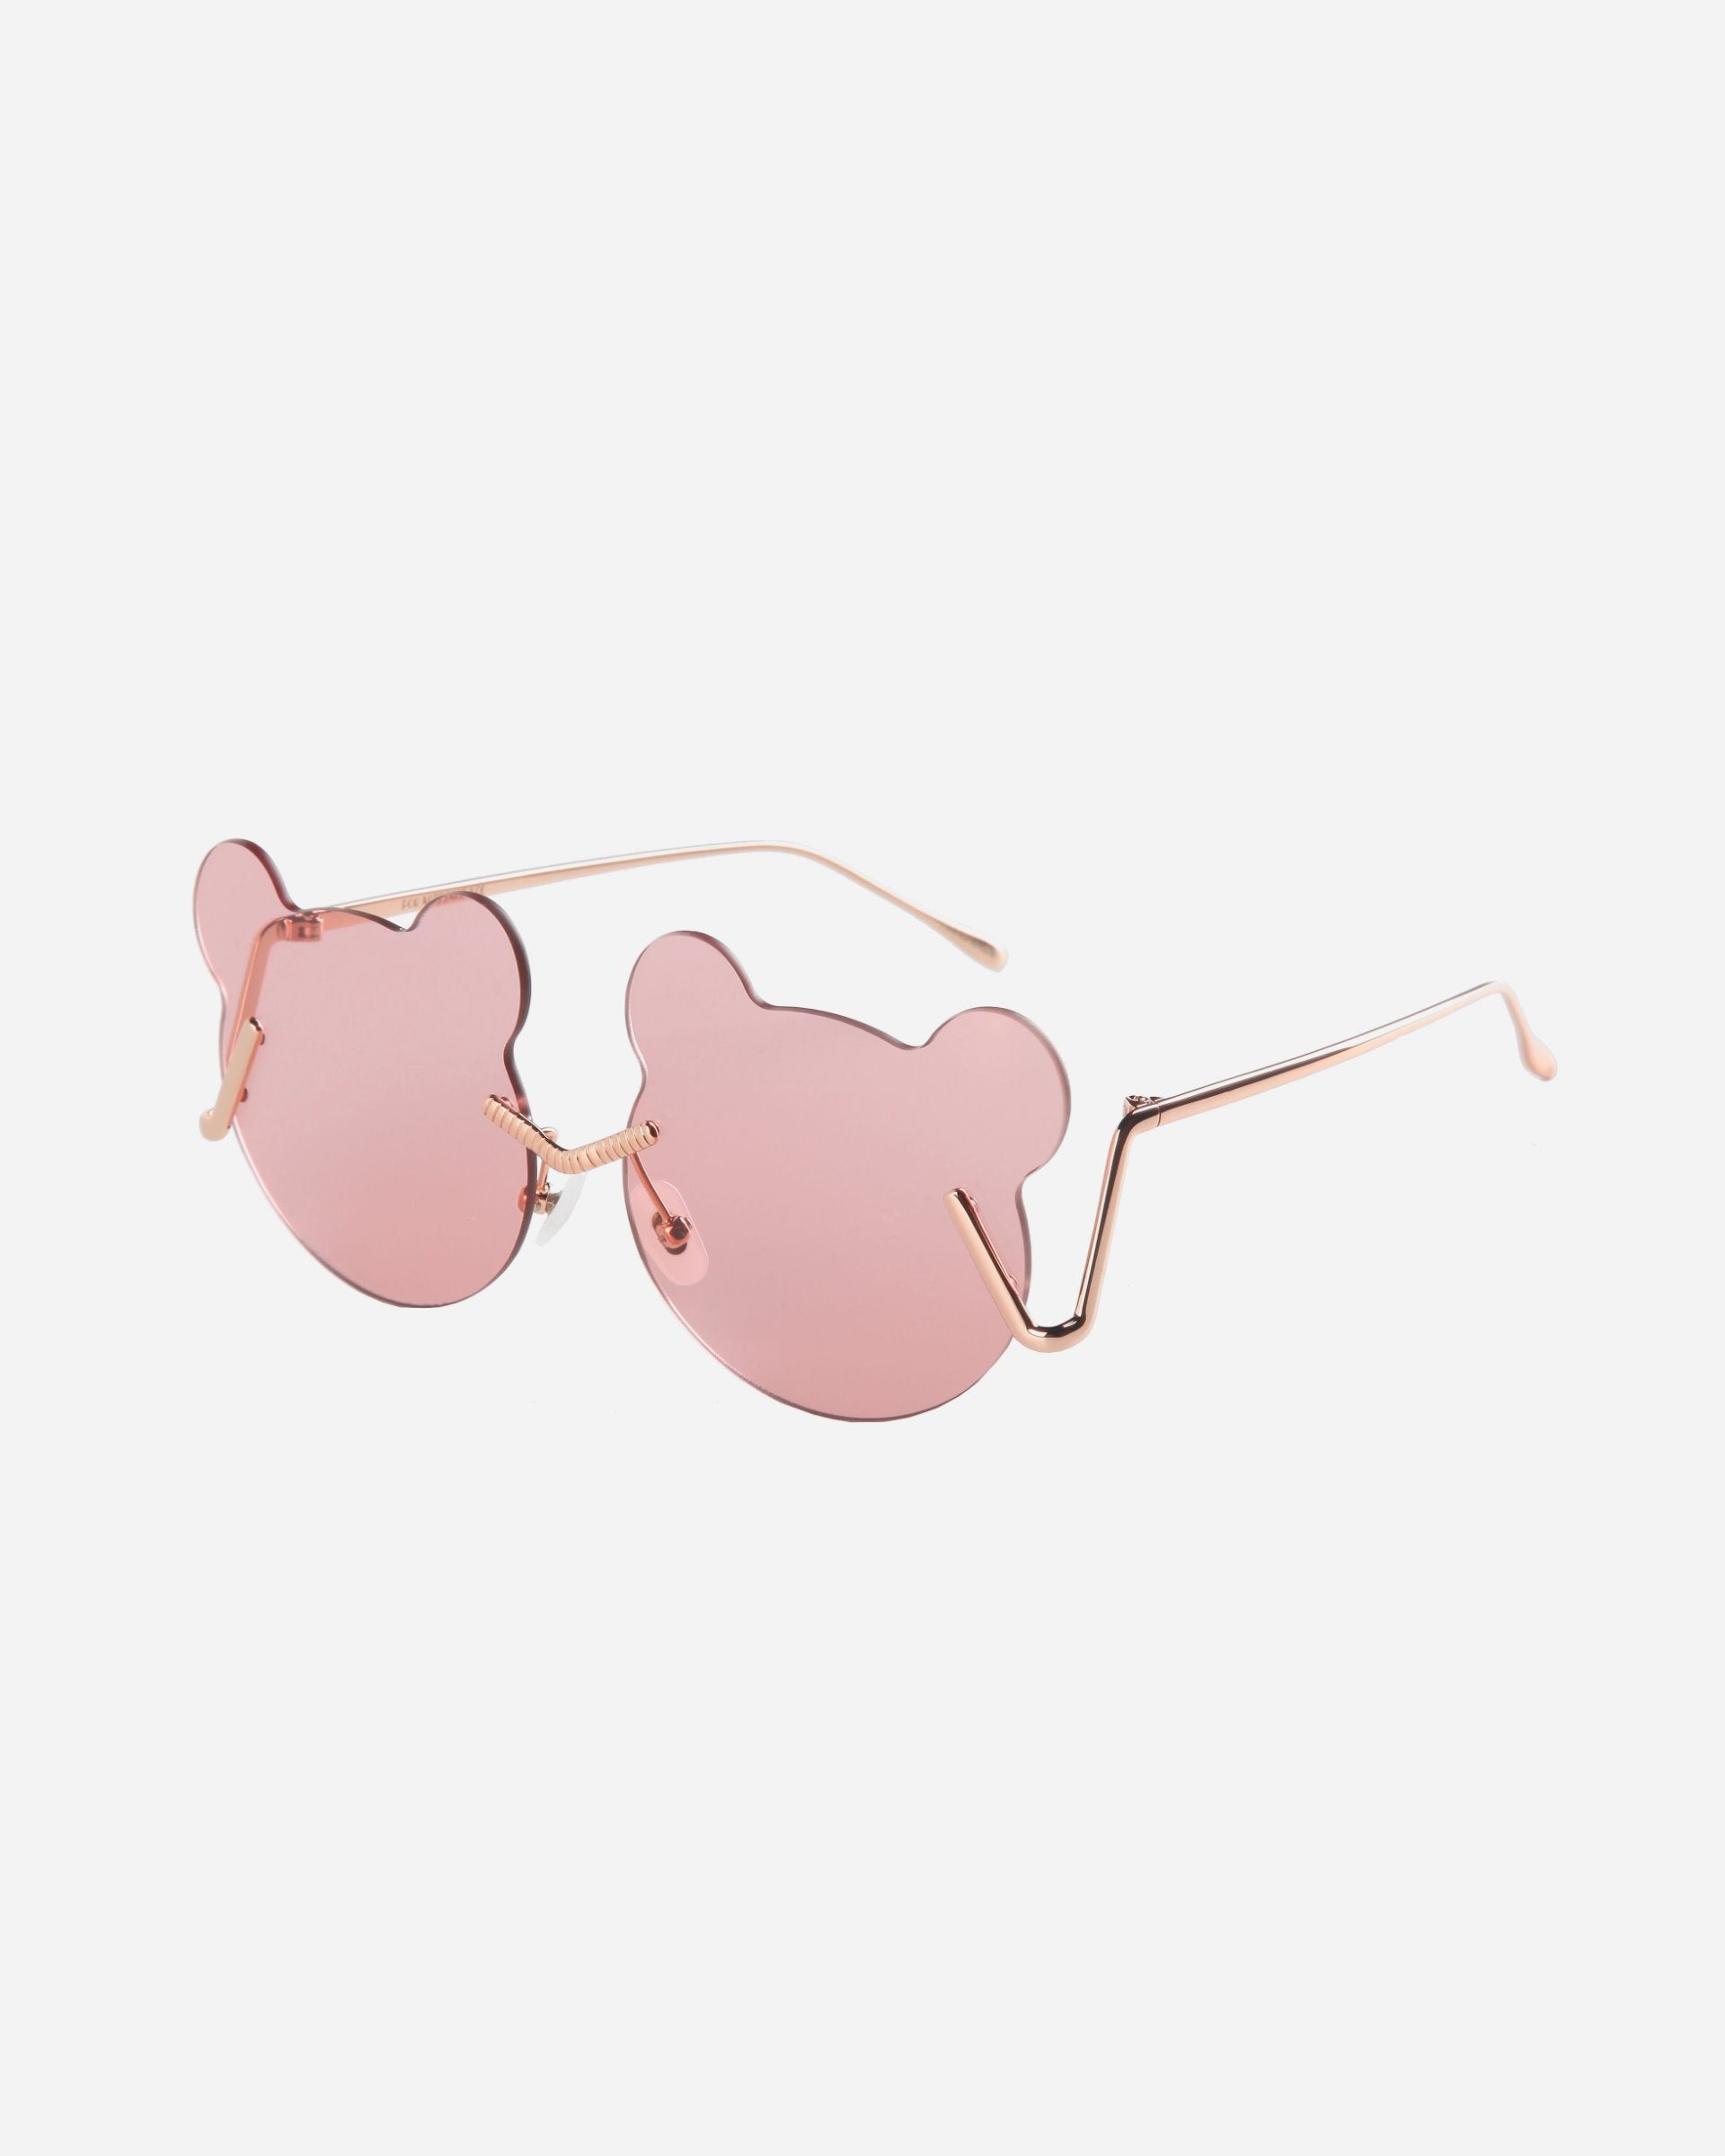 The For Art's Sake® Teddy sunglasses have pink, bear-shaped lenses and thin gold frames on a white background. The temples of the glasses have a slight angular design where they meet the lenses. Featuring UV protection, these stylish shades also come with adjustable nosepads for added comfort and fit.